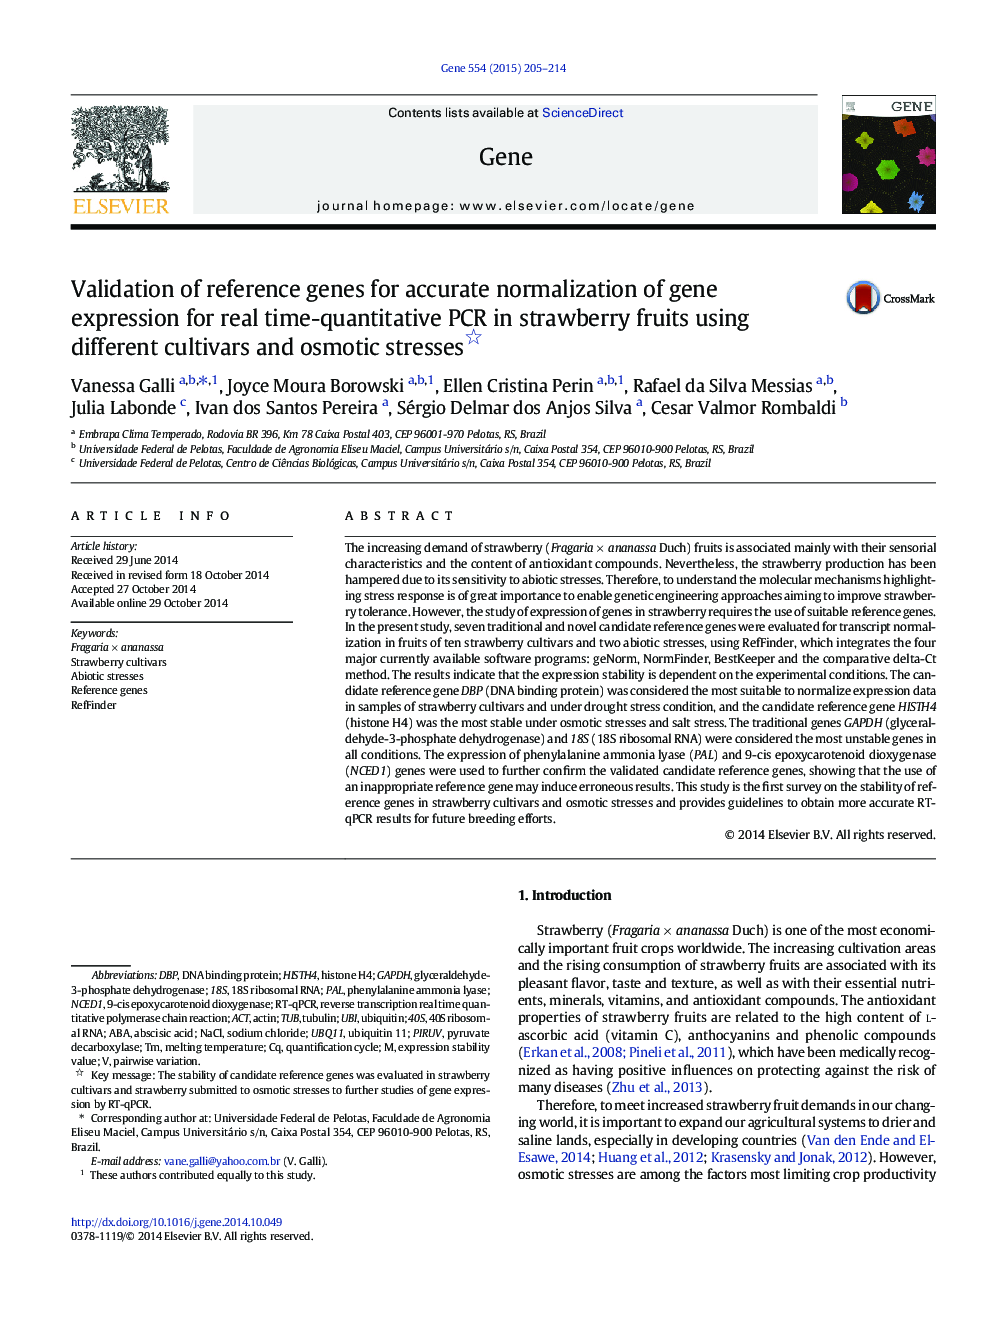 Validation of reference genes for accurate normalization of gene expression for real time-quantitative PCR in strawberry fruits using different cultivars and osmotic stresses 